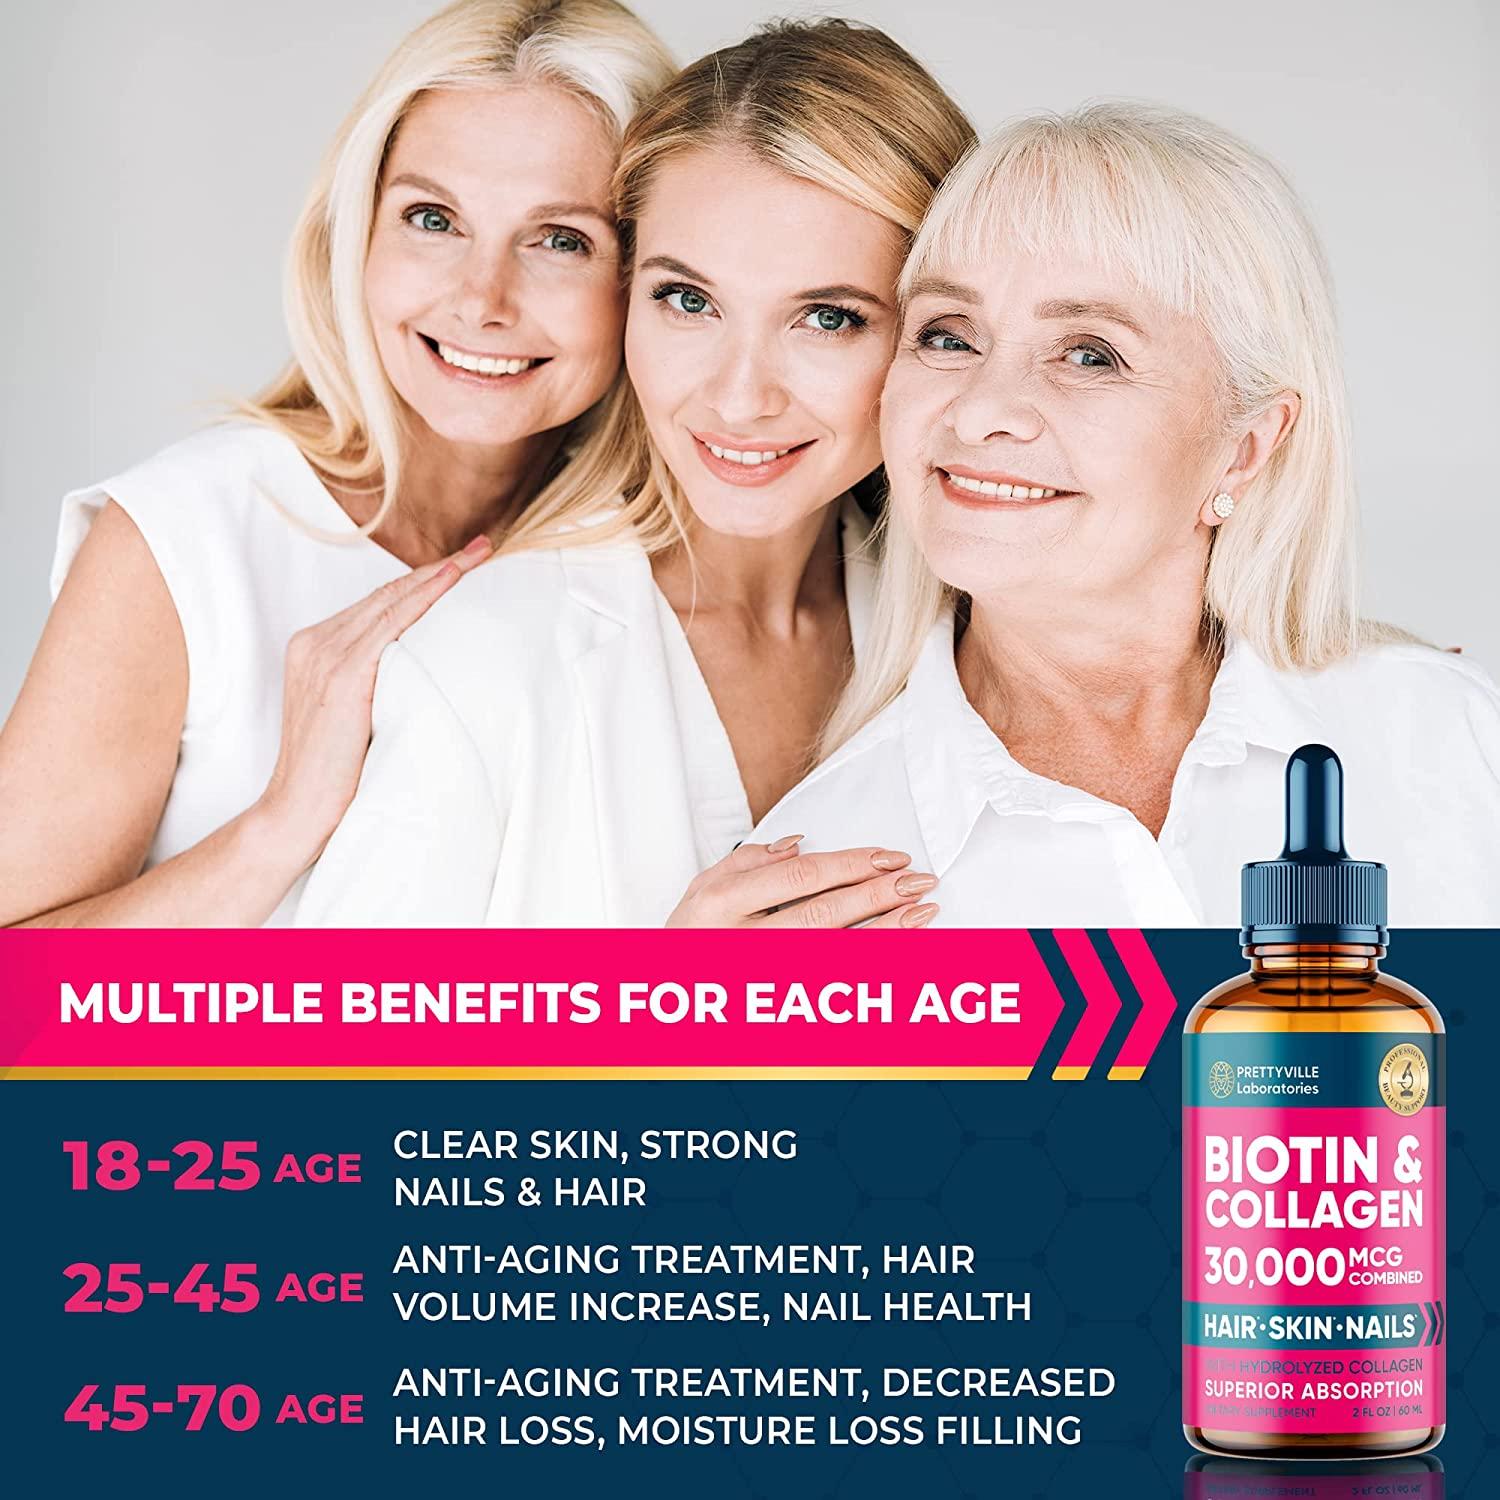 Liquid Biotin & Collagen for Hair Growth 20000mcg - Support Hair Health,  Strong Nails and Glowing Skin - 20000mcg of Collagen and Biotin Combined